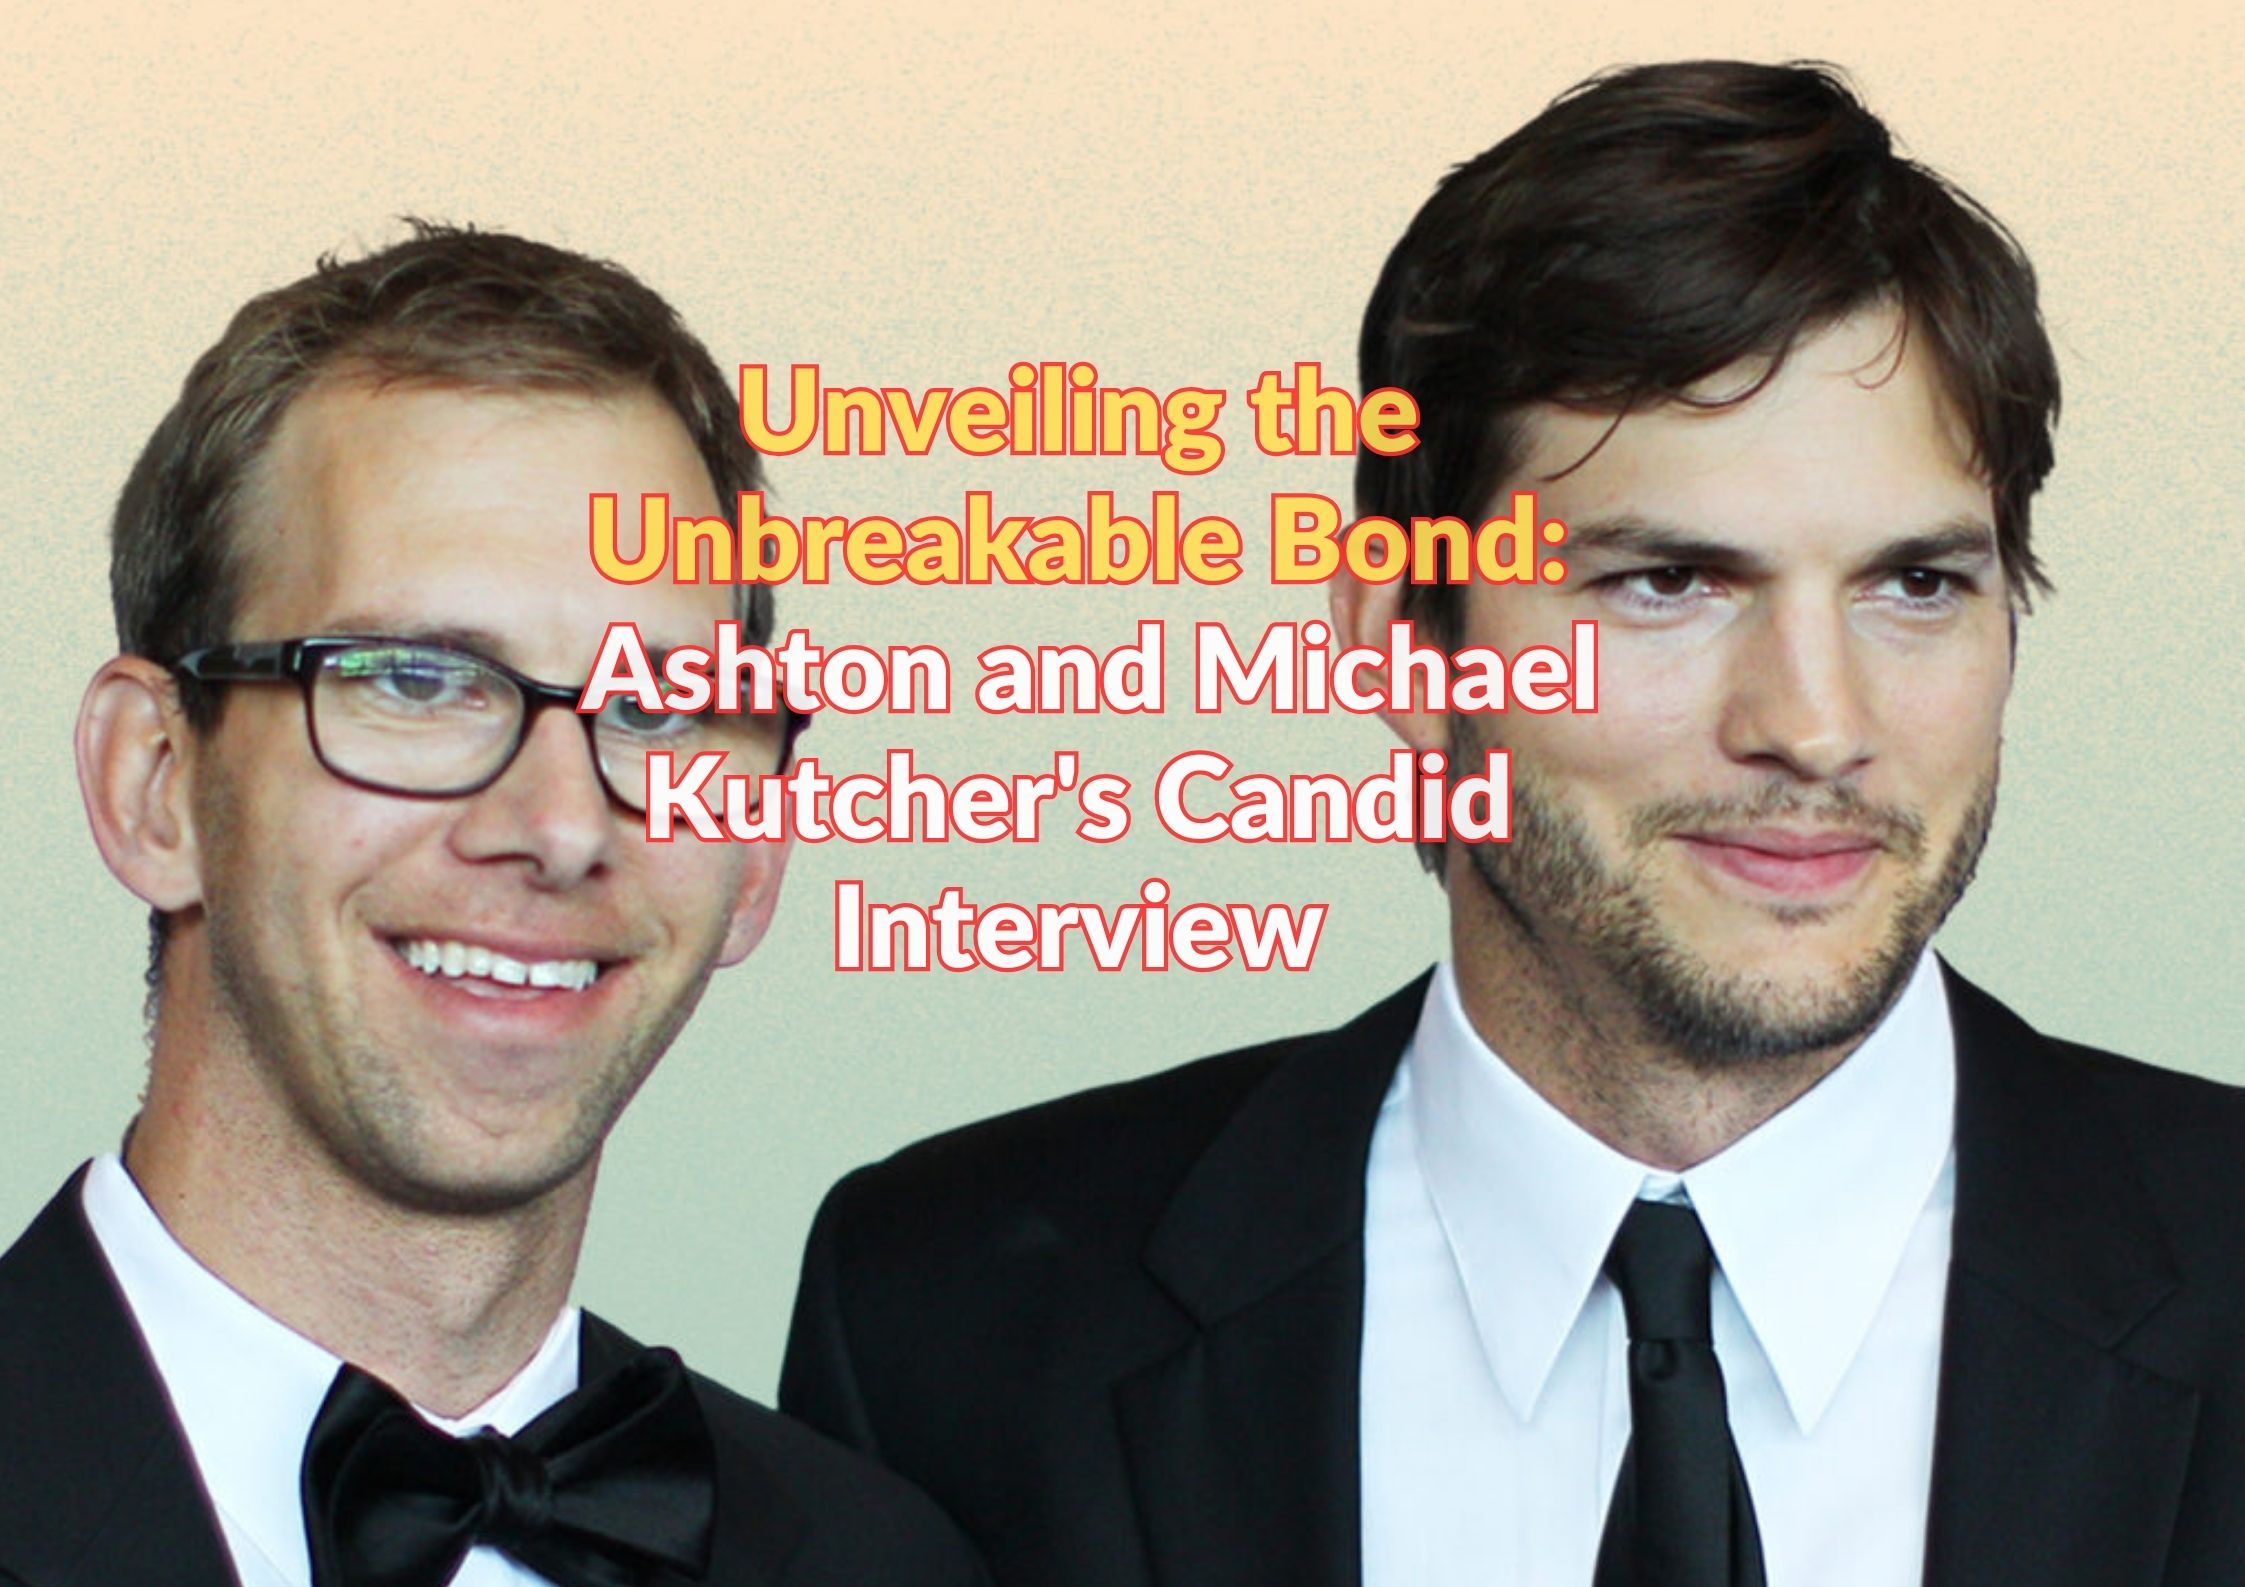 Unveiling the Unbreakable Bond: Ashton and Michael Kutcher's Candid Interview